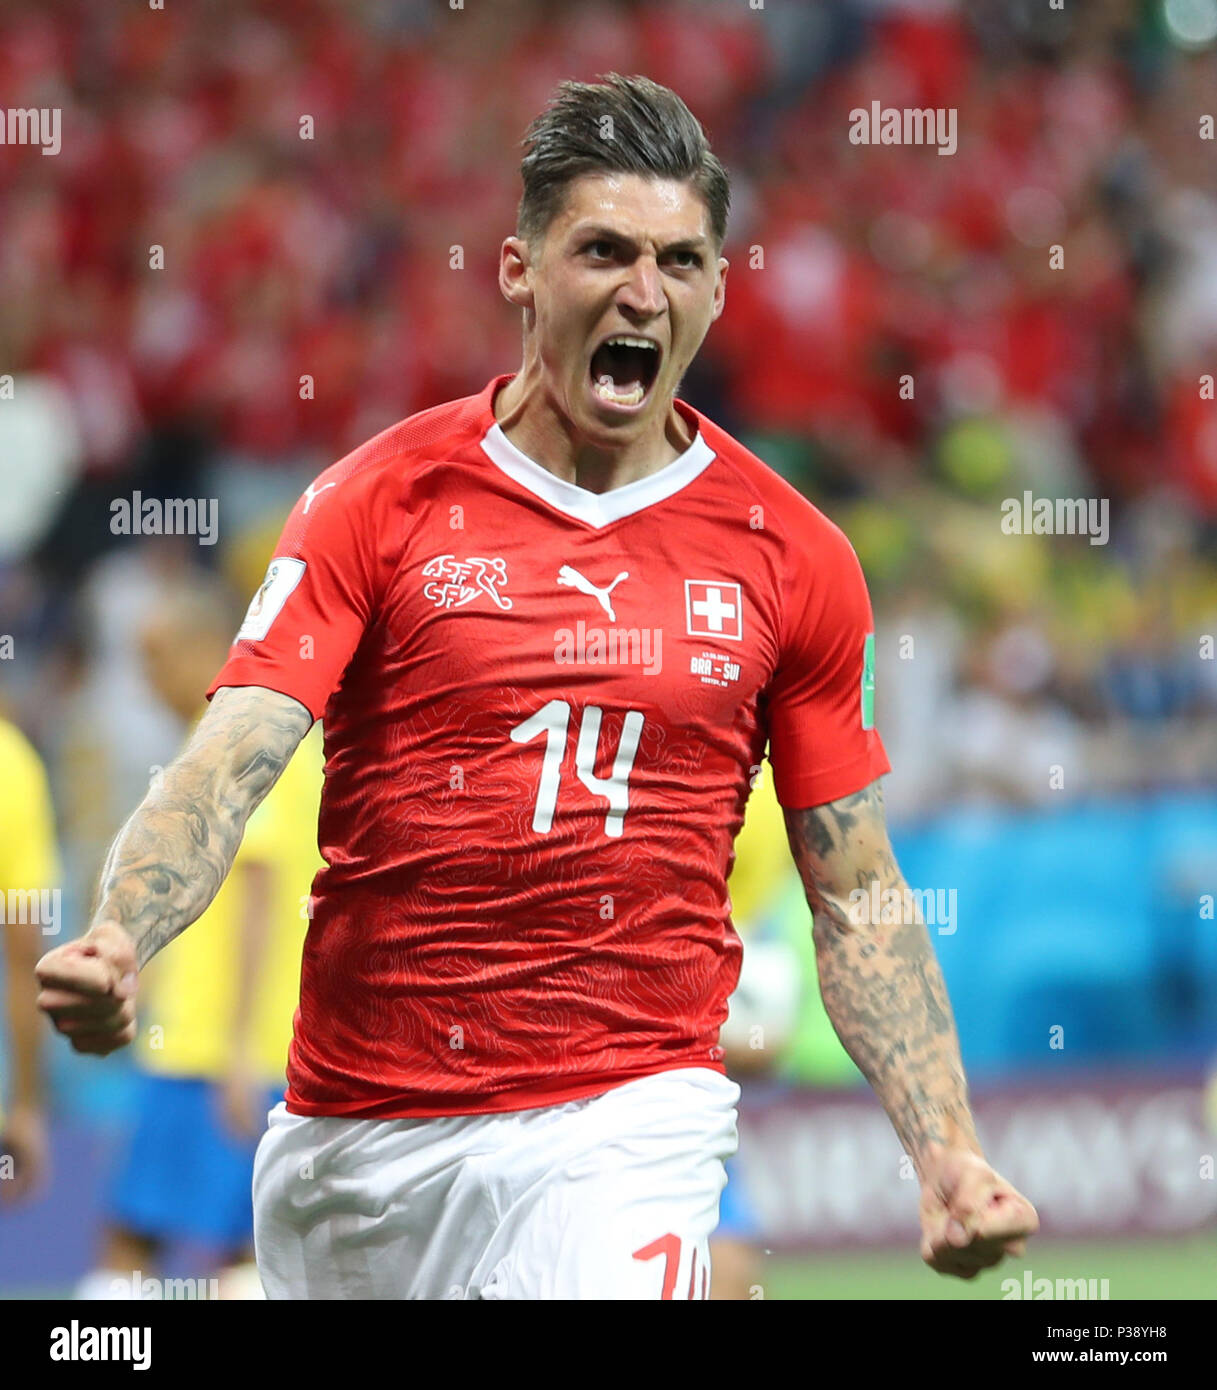 Rostov On Don. 17th June, 2018. Steven Zuber of Switzerland celebrates scoring during a group E match between Brazil and Switzerland at the 2018 FIFA World Cup in Rostov-on-Don, Russia, June 17, 2018. Credit: Lu Jinbo/Xinhua/Alamy Live News Stock Photo